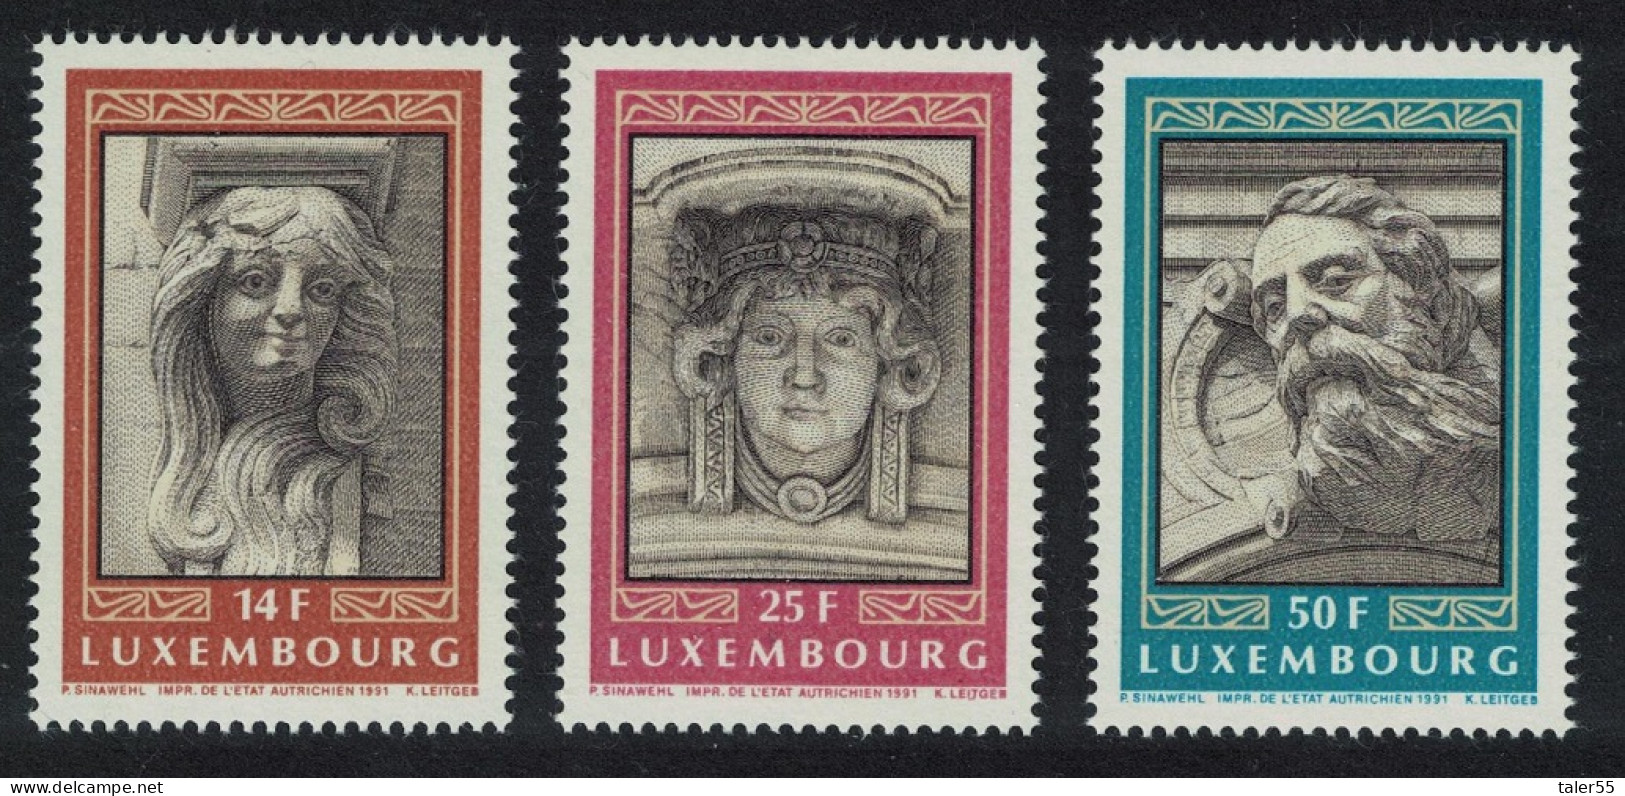 Luxembourg Mascarons Stone Faces On Buildings 3v 1991 MNH SG#1301-1303 MI#1277-1279 - Nuovi